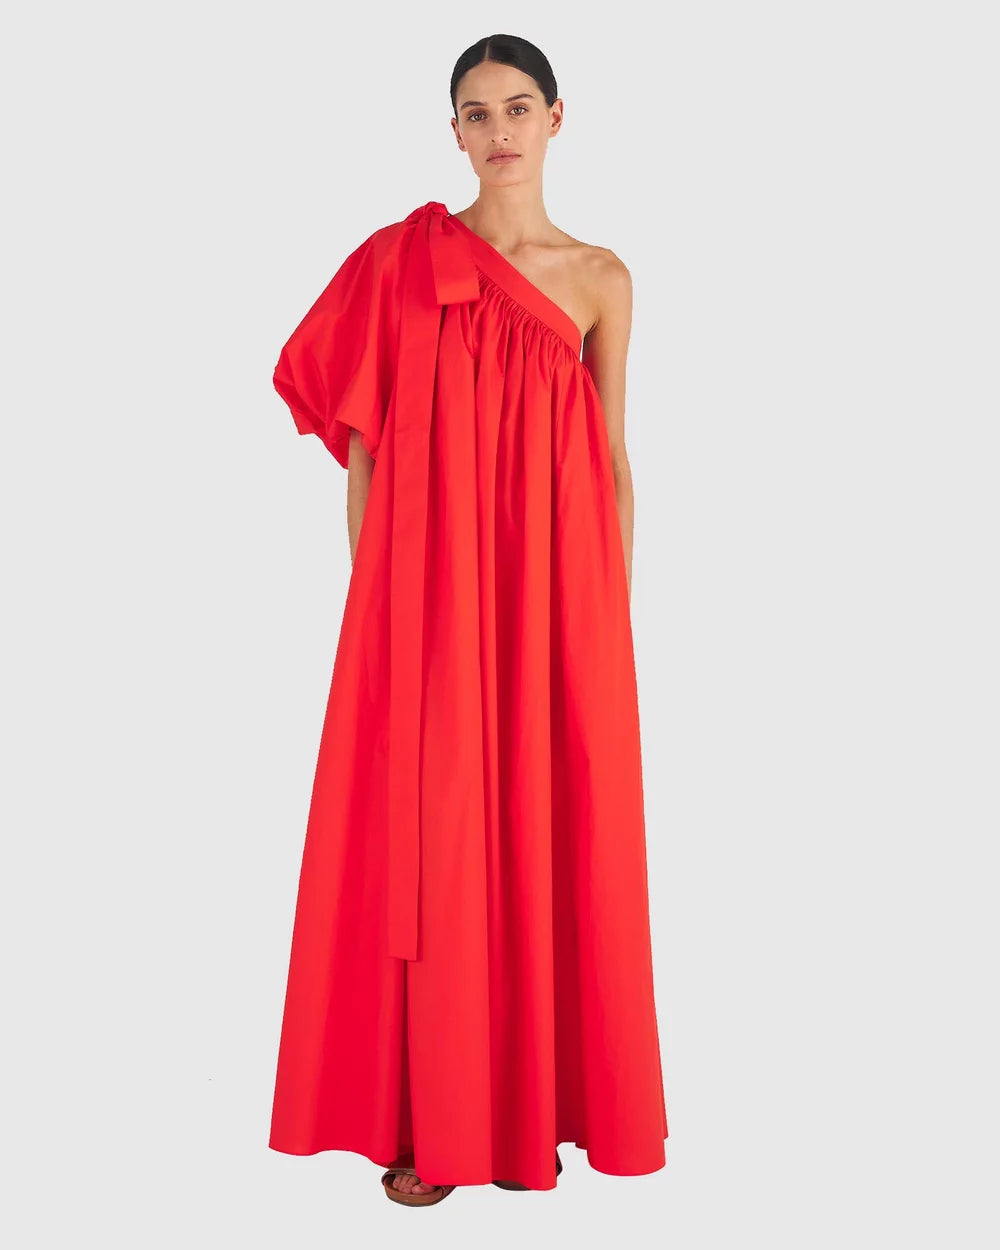 Oroton One Shoulder Dress in True Red